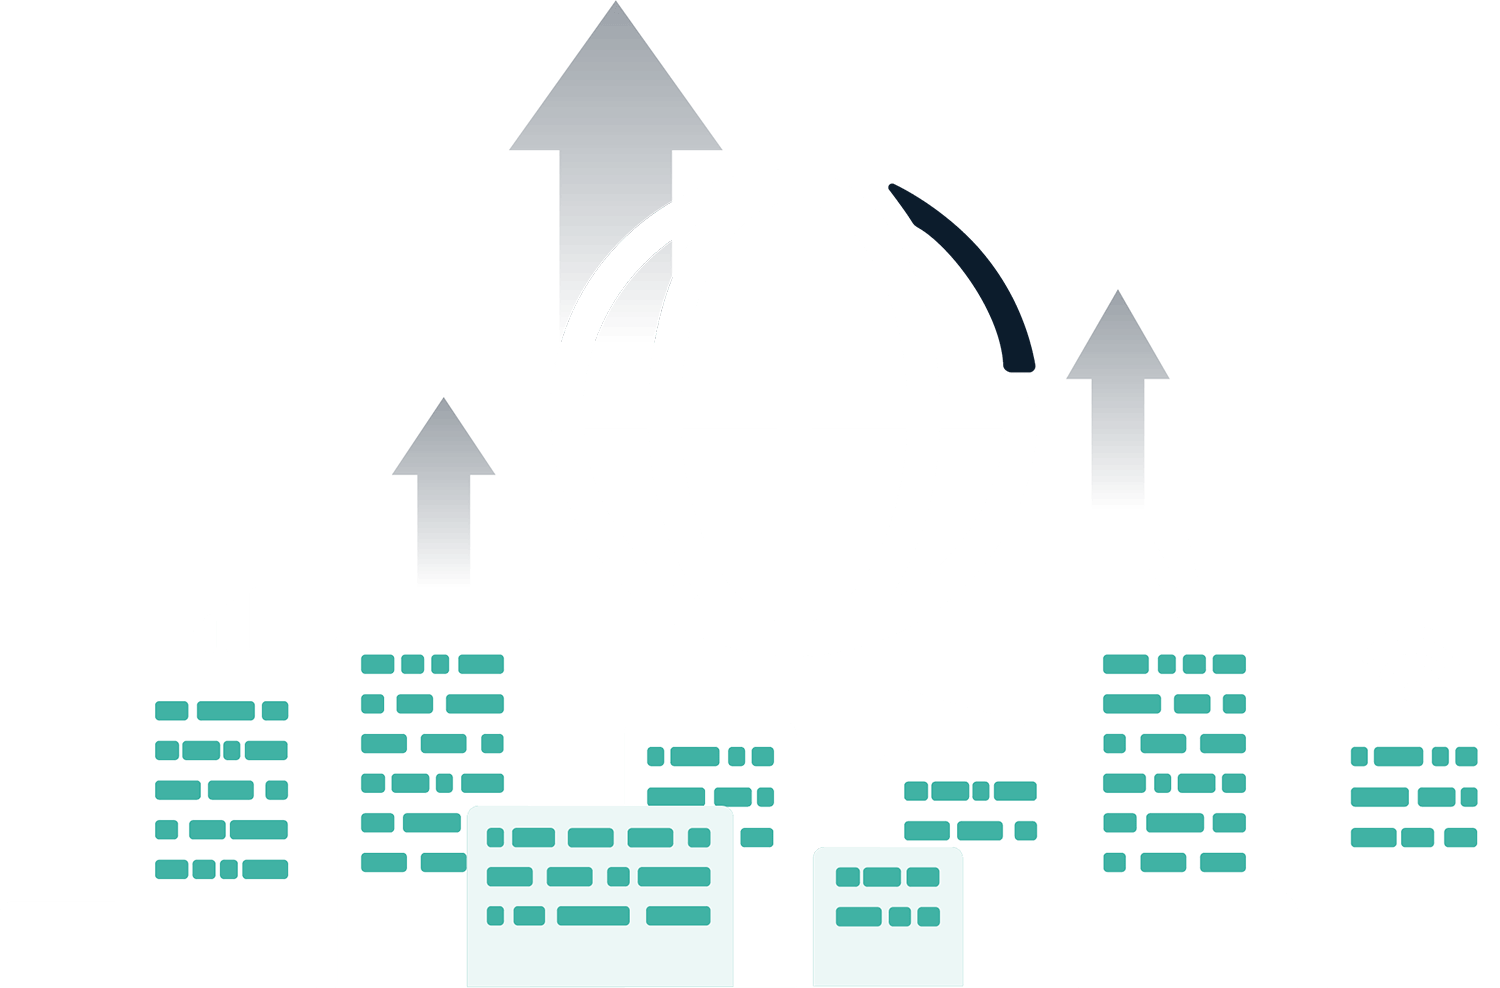 Illustration of tall buildings with icons of wifi symbols, a globe, and arrows pointing up above the buildings.